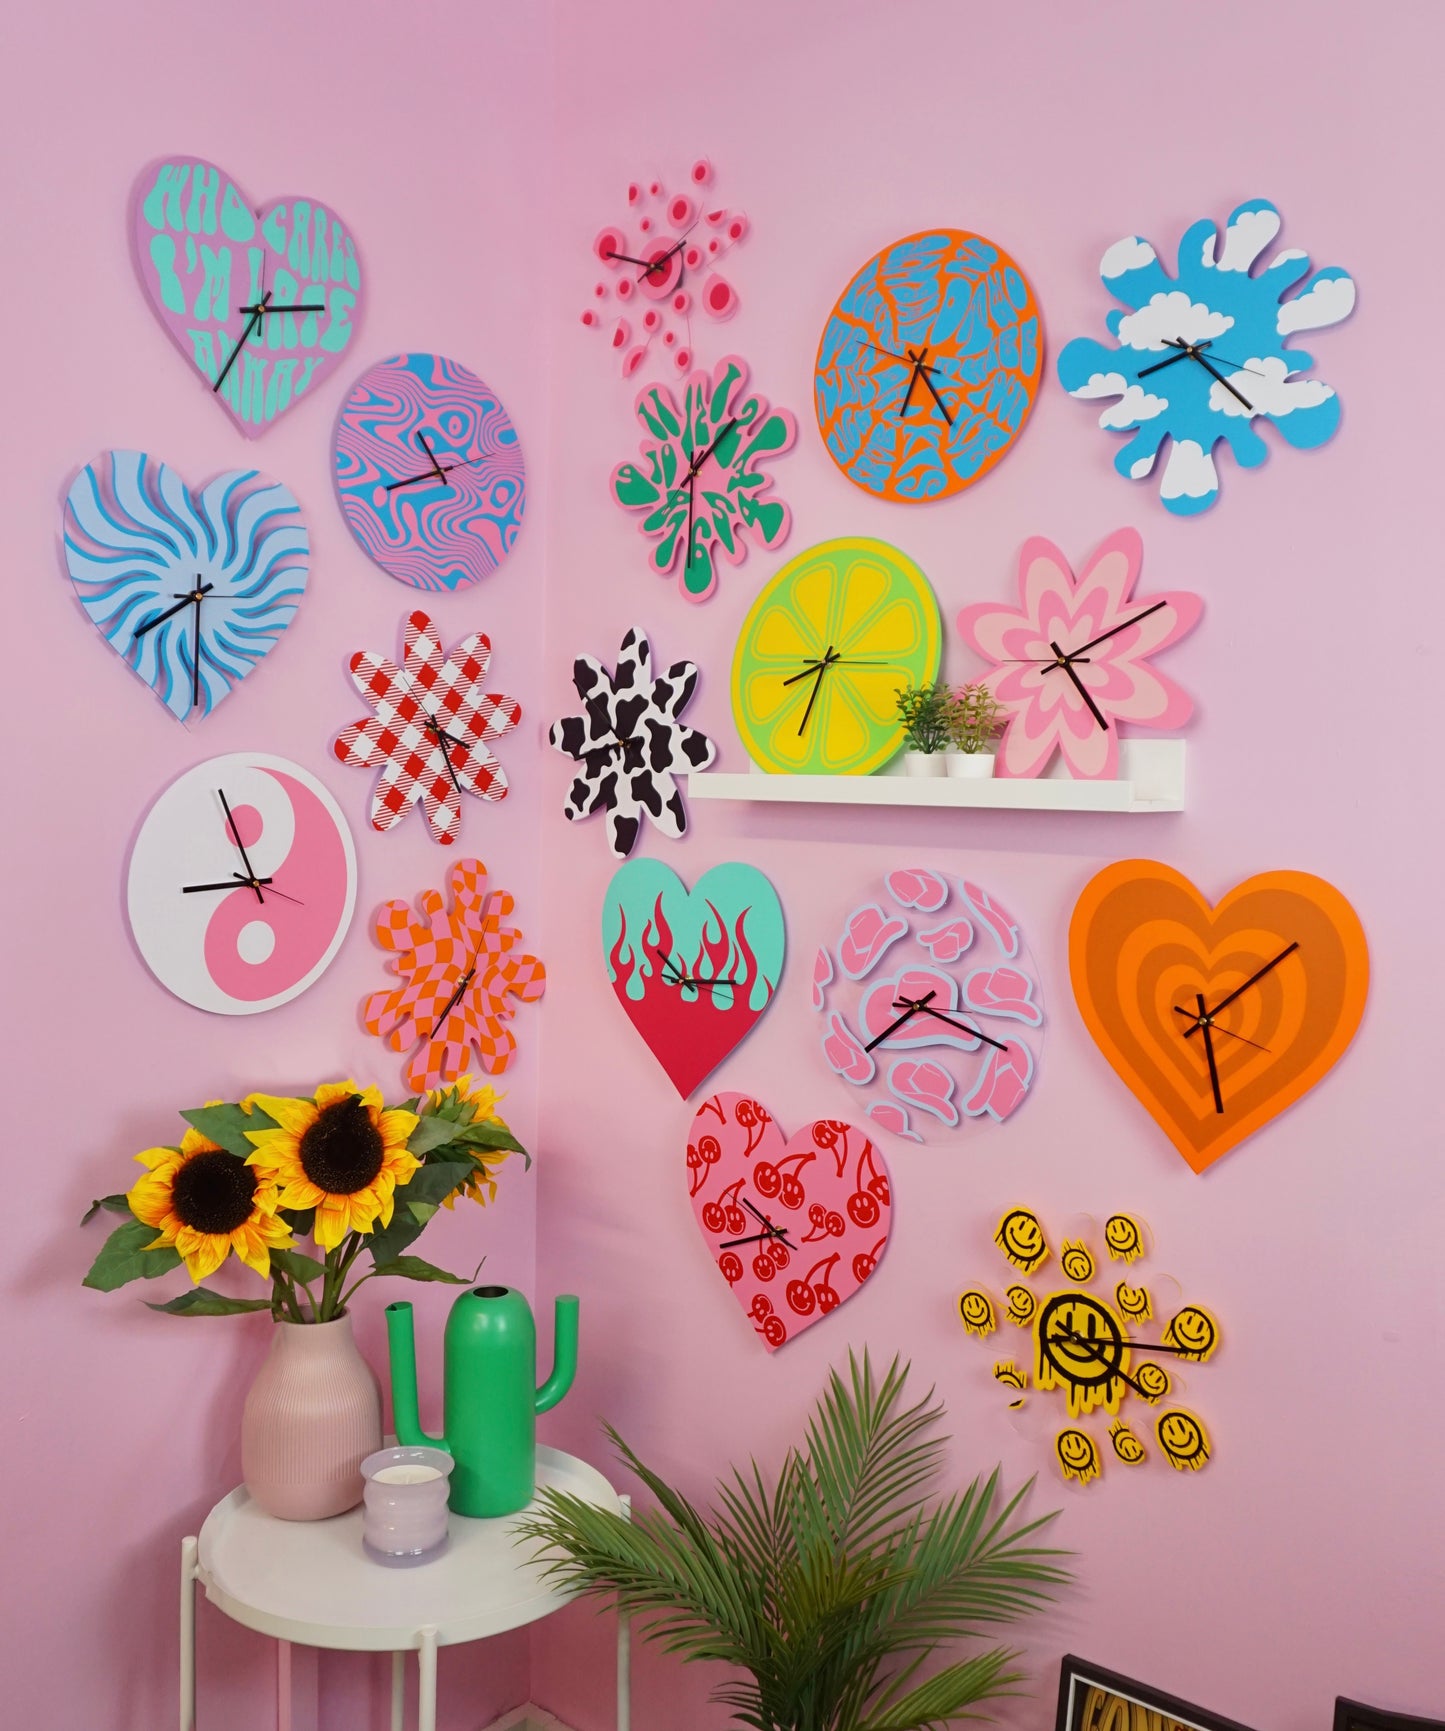 Who cares i'm late anyway heart shaped decorative clock silent movement